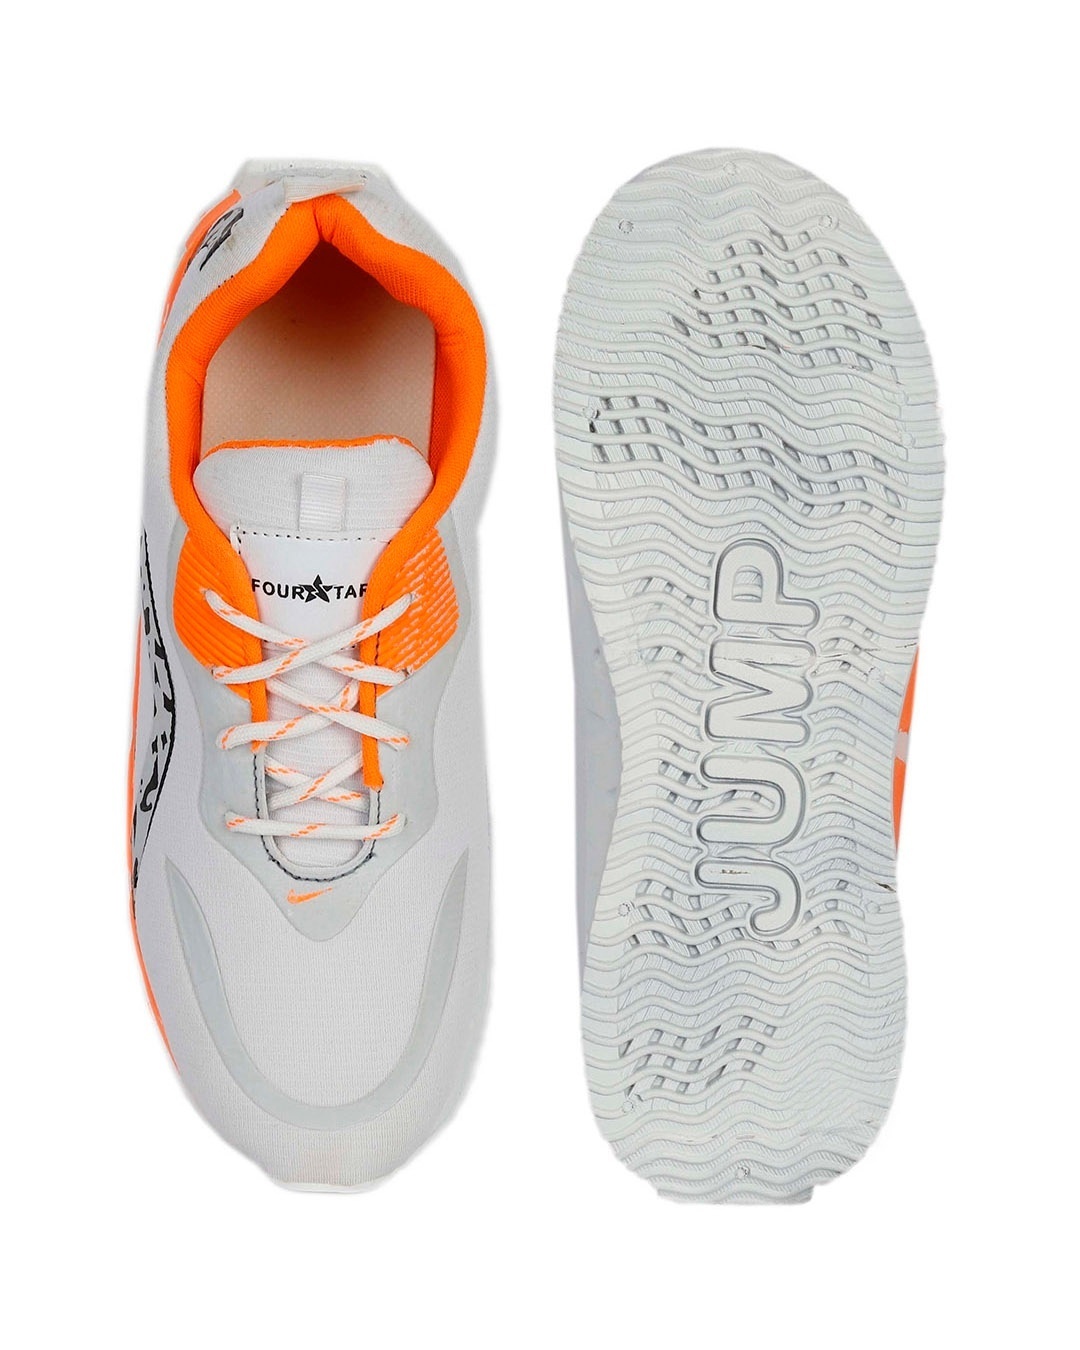 Buy Men's White Printed Sports Shoes Online in India at Bewakoof